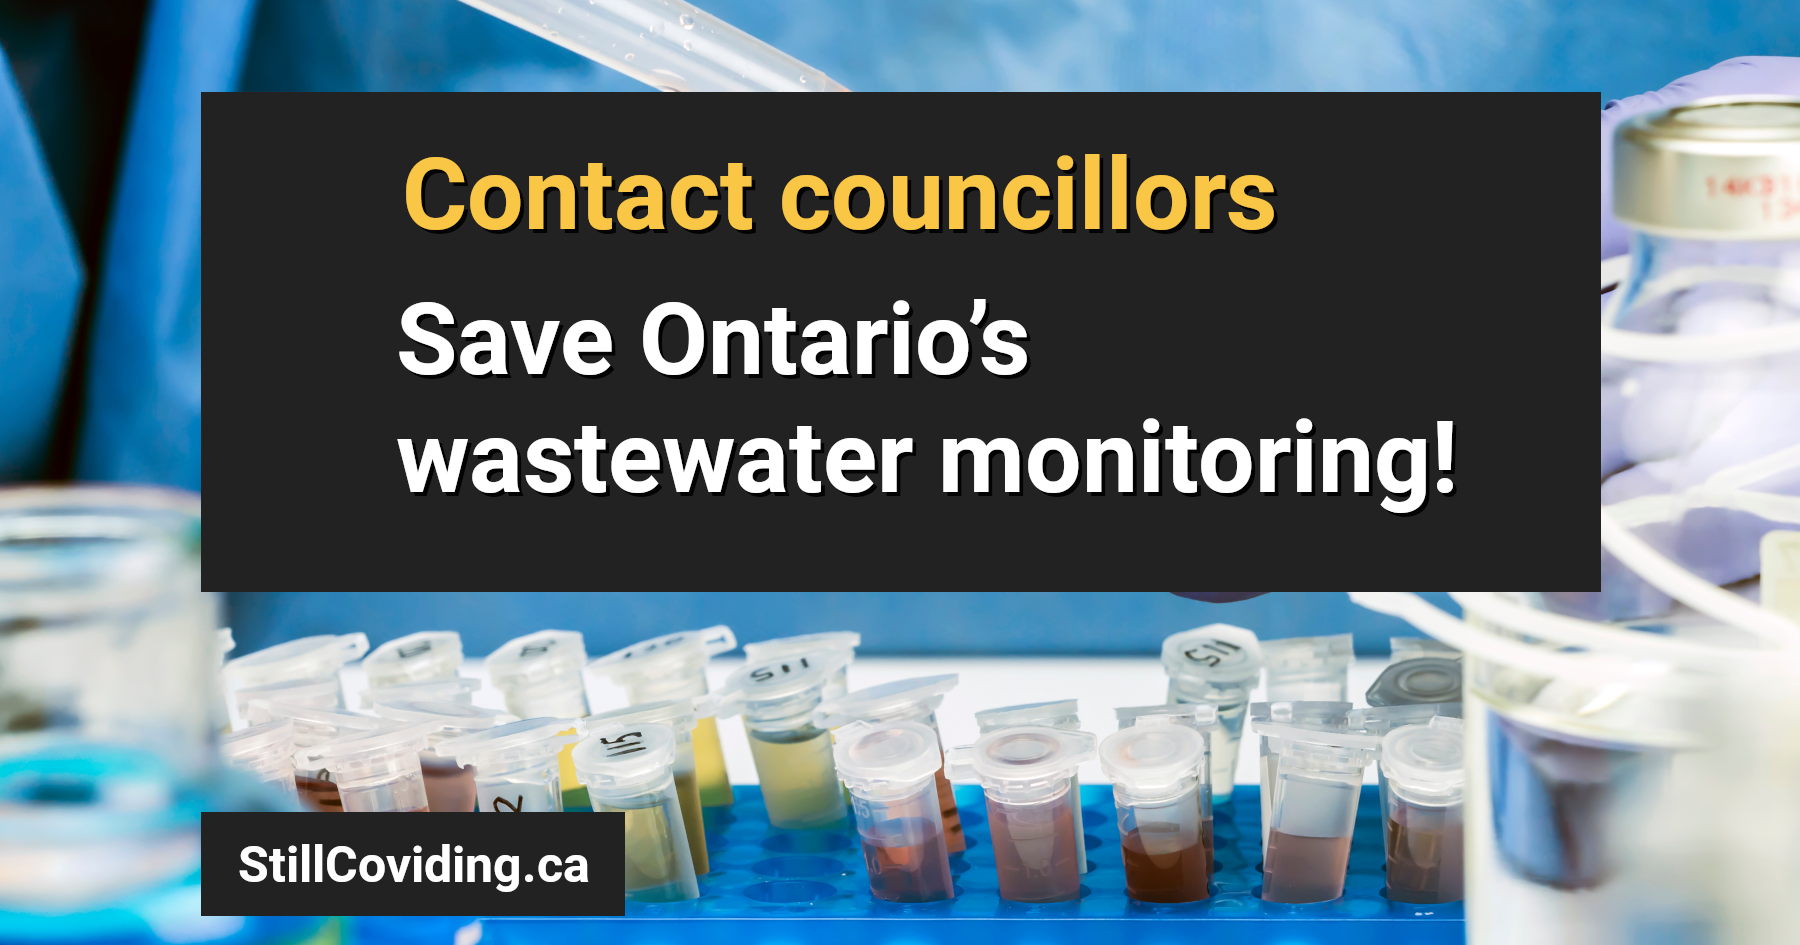 Photo of some test tubes and equipment in a lab, with text: Contact councillors. Save Ontario’s wastewater monitoring! StillCoviding.ca.